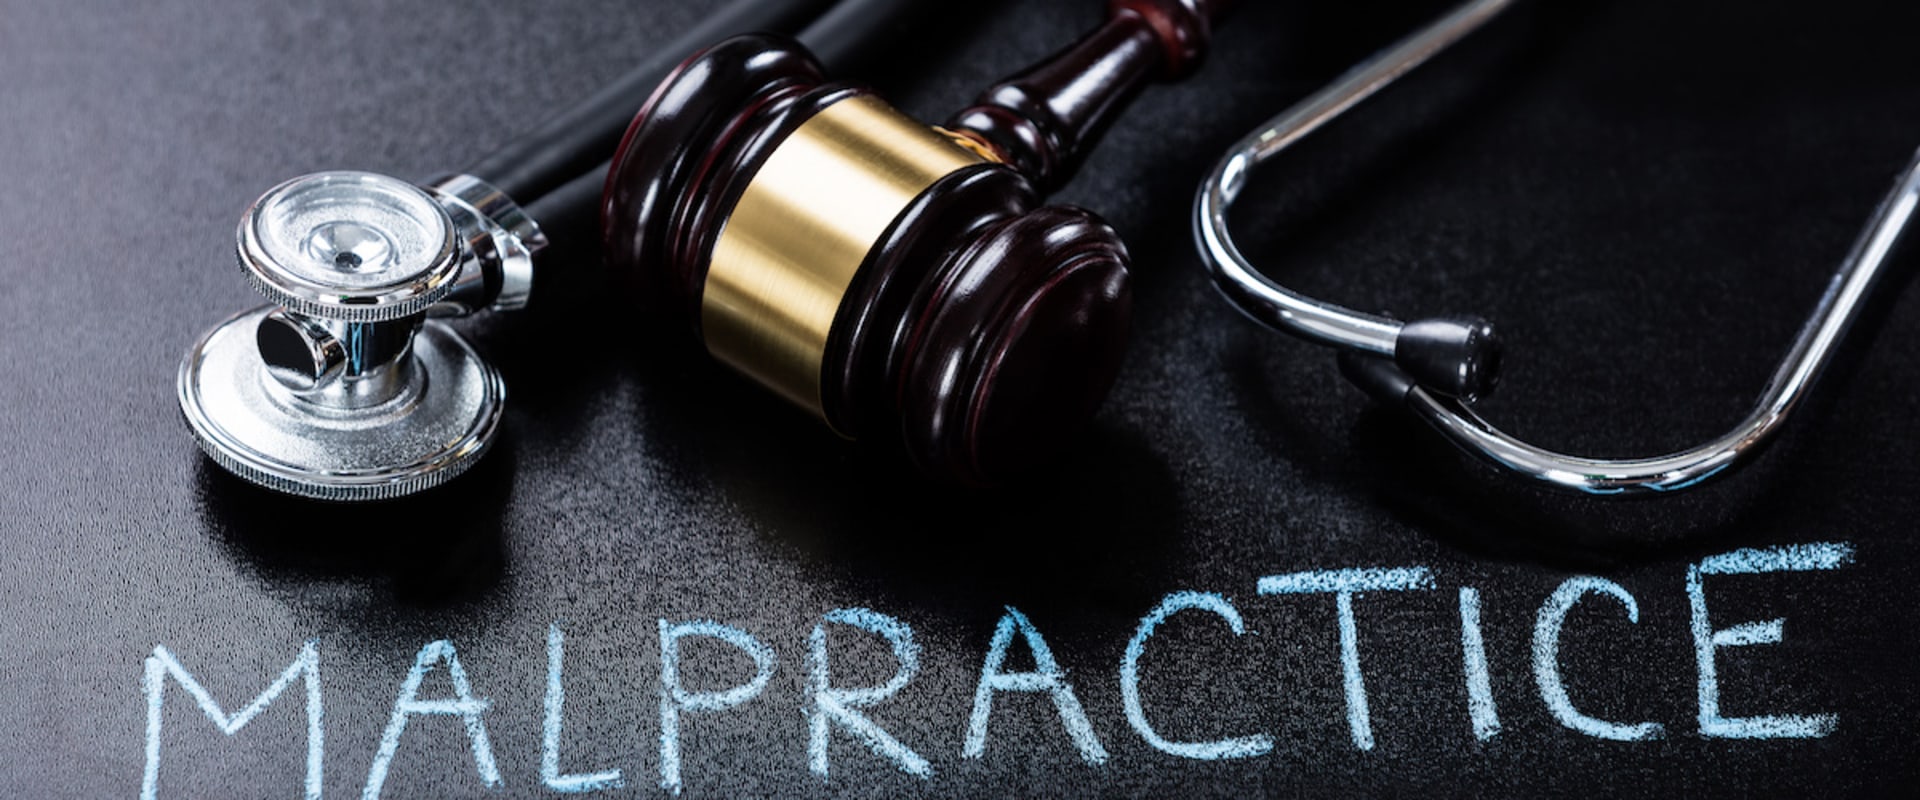 Understanding Medical Malpractice: Signs, Consequences, and Legal Action